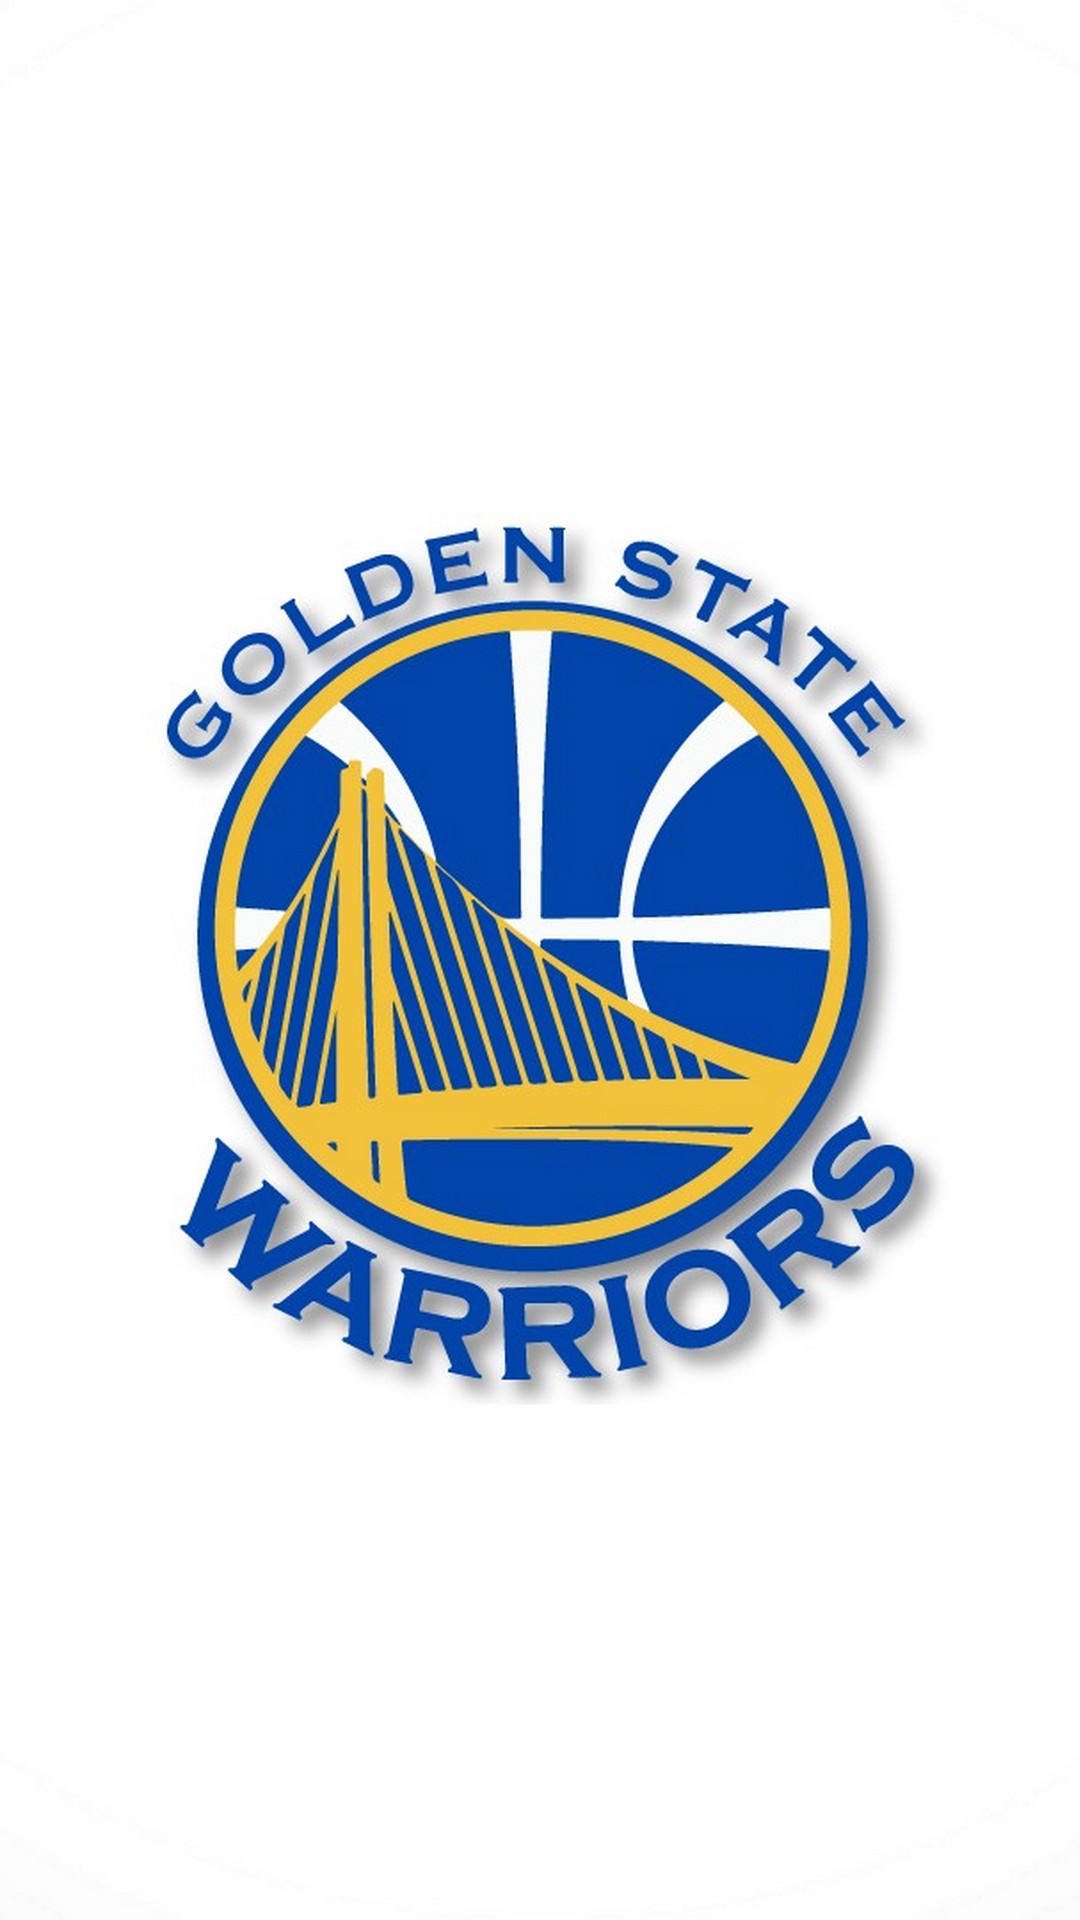 Golden State Warriors Hd Wallpaper For Iphone With - HD Wallpaper 